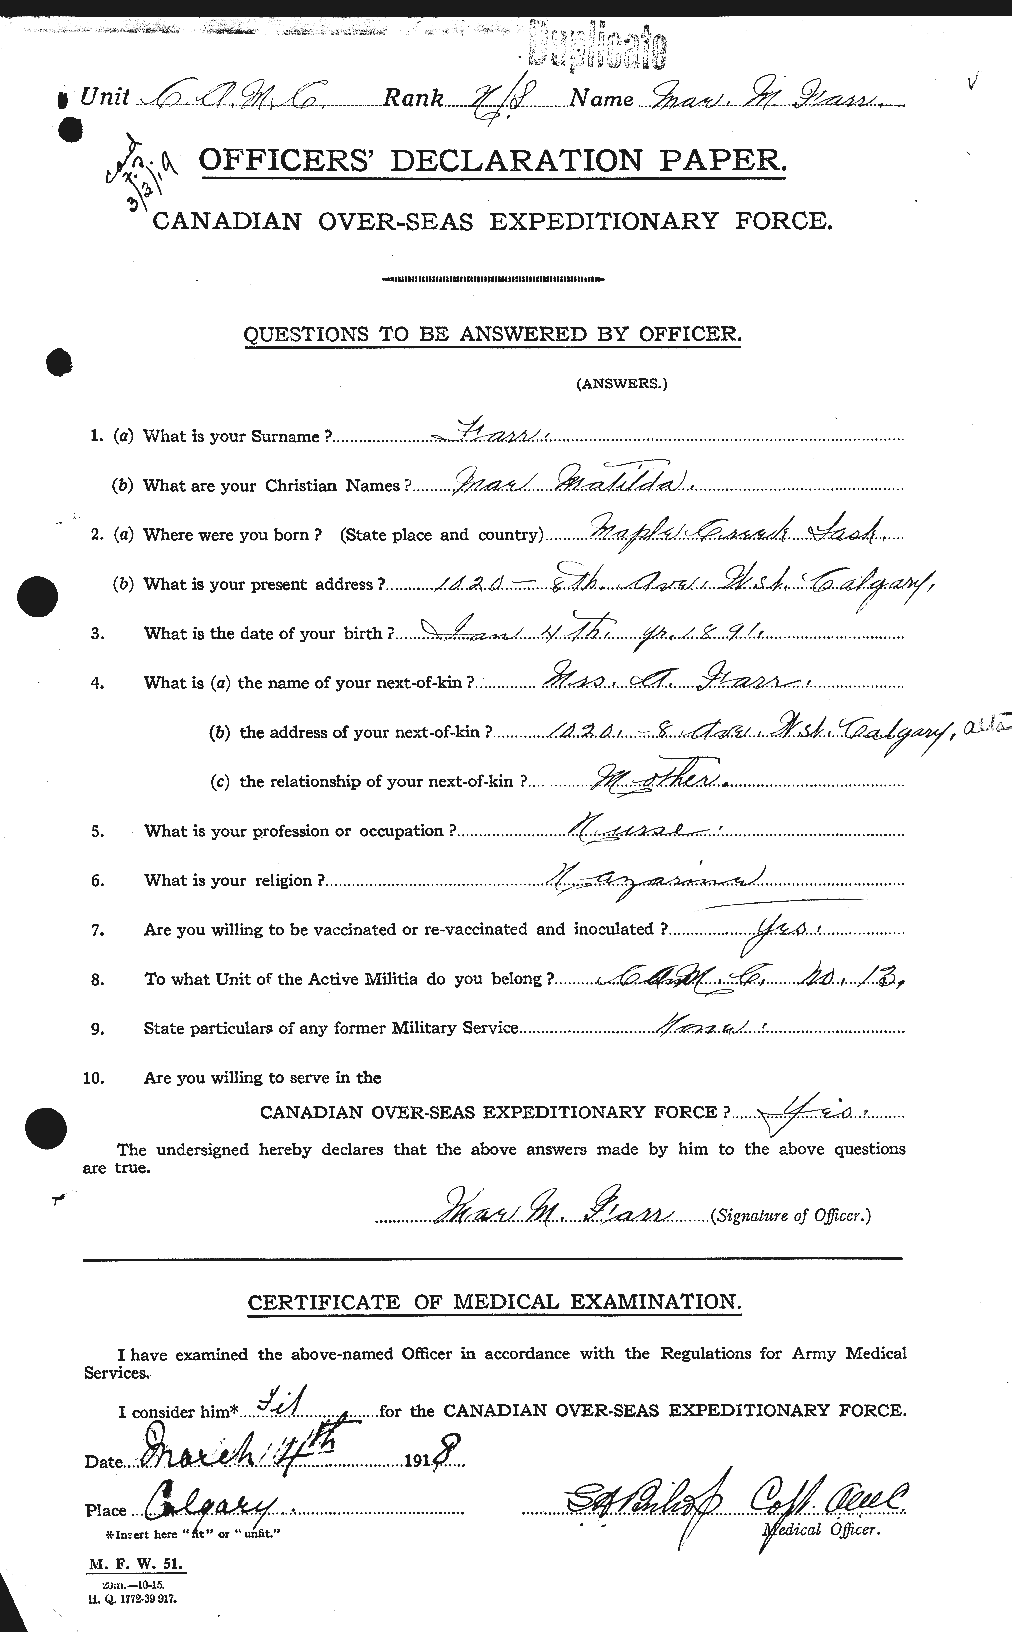 Personnel Records of the First World War - CEF 319910a